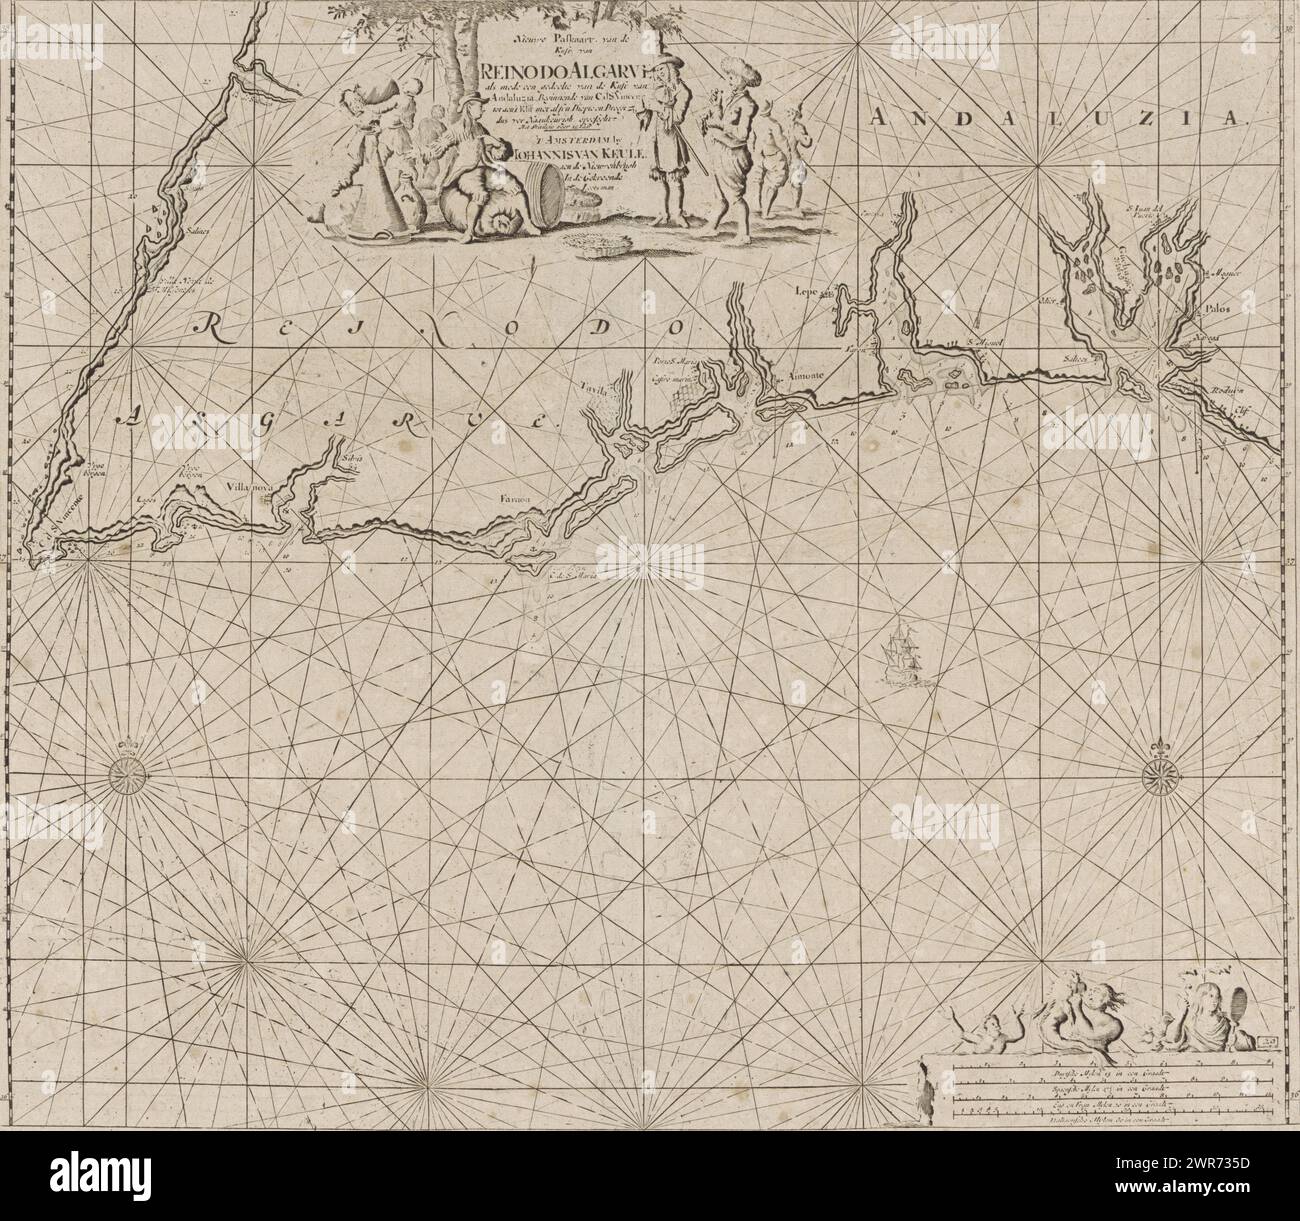 Sea chart of part of the southern coast of Portugal and Spain with the Algarve and Andalusia, New pass map, of the coast of Reino Do Algarve as well as part of the coast of Andalusia. starting from C.d.S. Vincent tot aen 't Klif (title on object), Sea chart of part of the southern coast of Portugal and Spain with the Algarve and Andalusia, with two compass roses, the North is at the top. Top center a cartouche with the title and address of the publisher, surrounded by a sailor and some tradesmen. Bottom right a mermaid and two mermen at the scale, shown in German Stock Photo